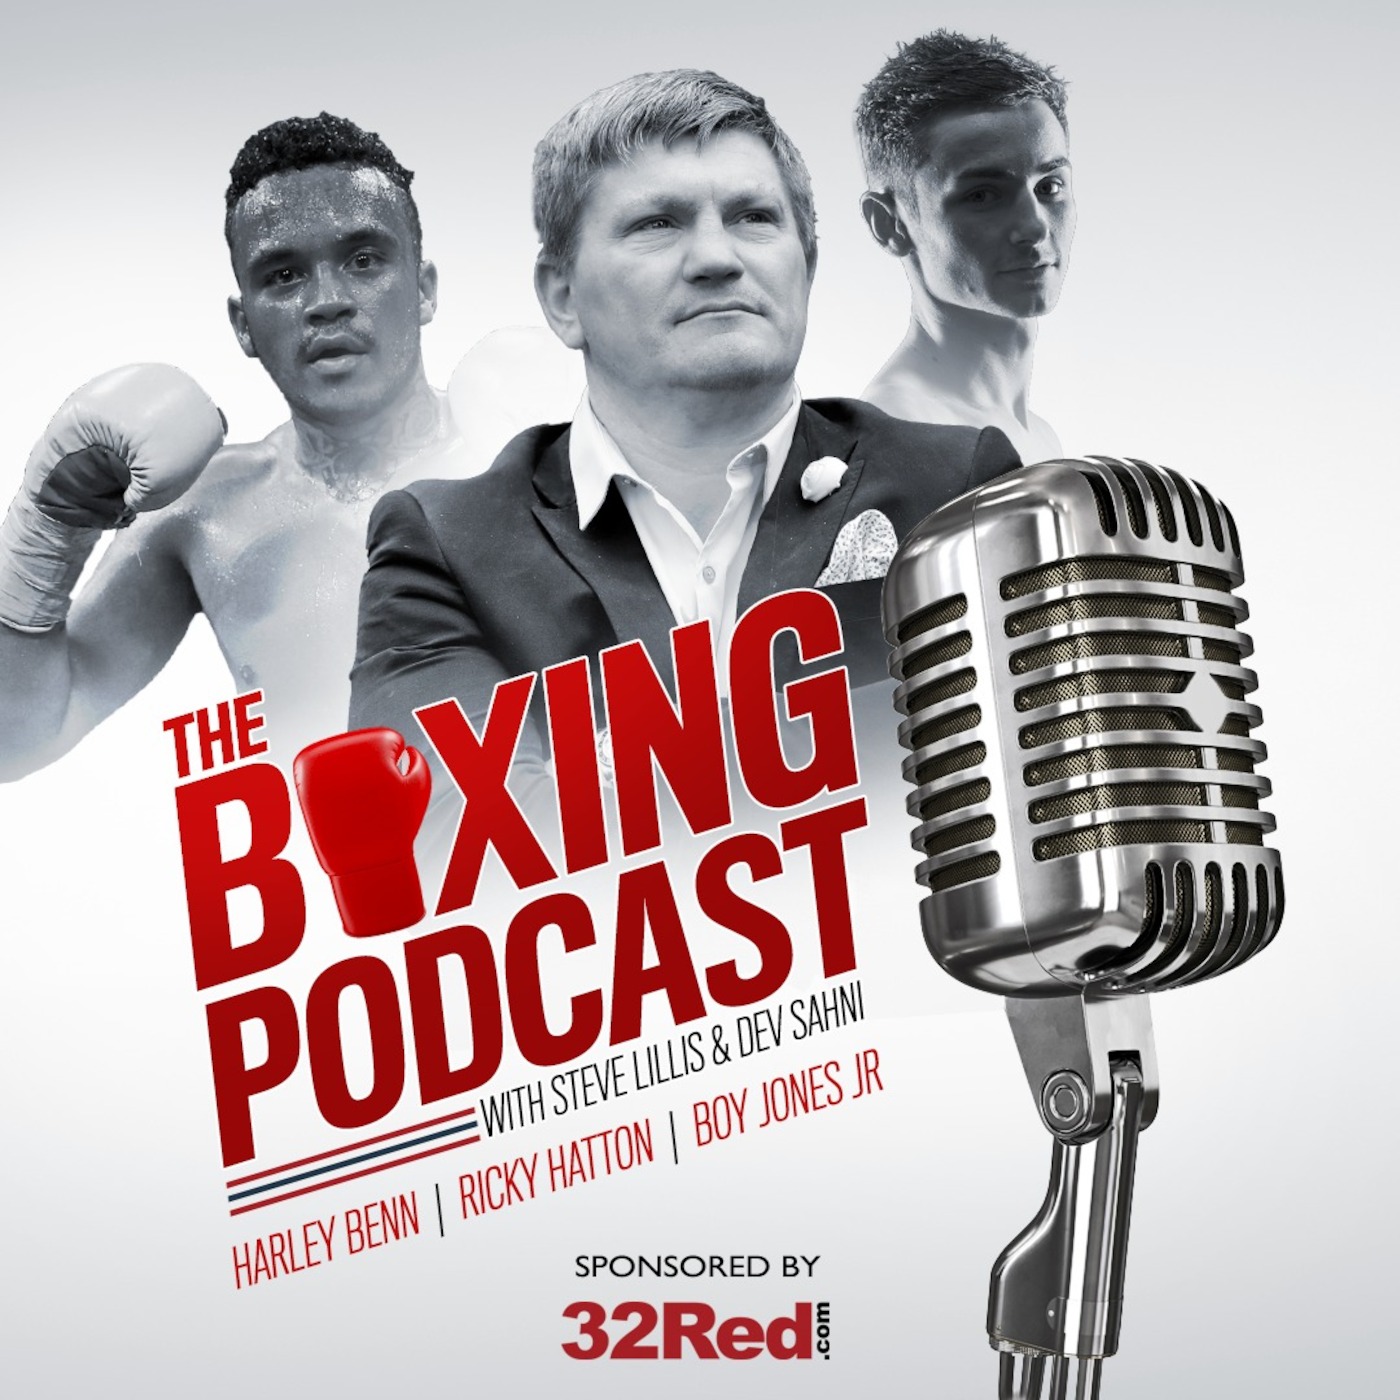 The Boxing Podcast | Episode 16 – Ricky Hatton, Harley Benn, Boy Jones Jr & weekend preview